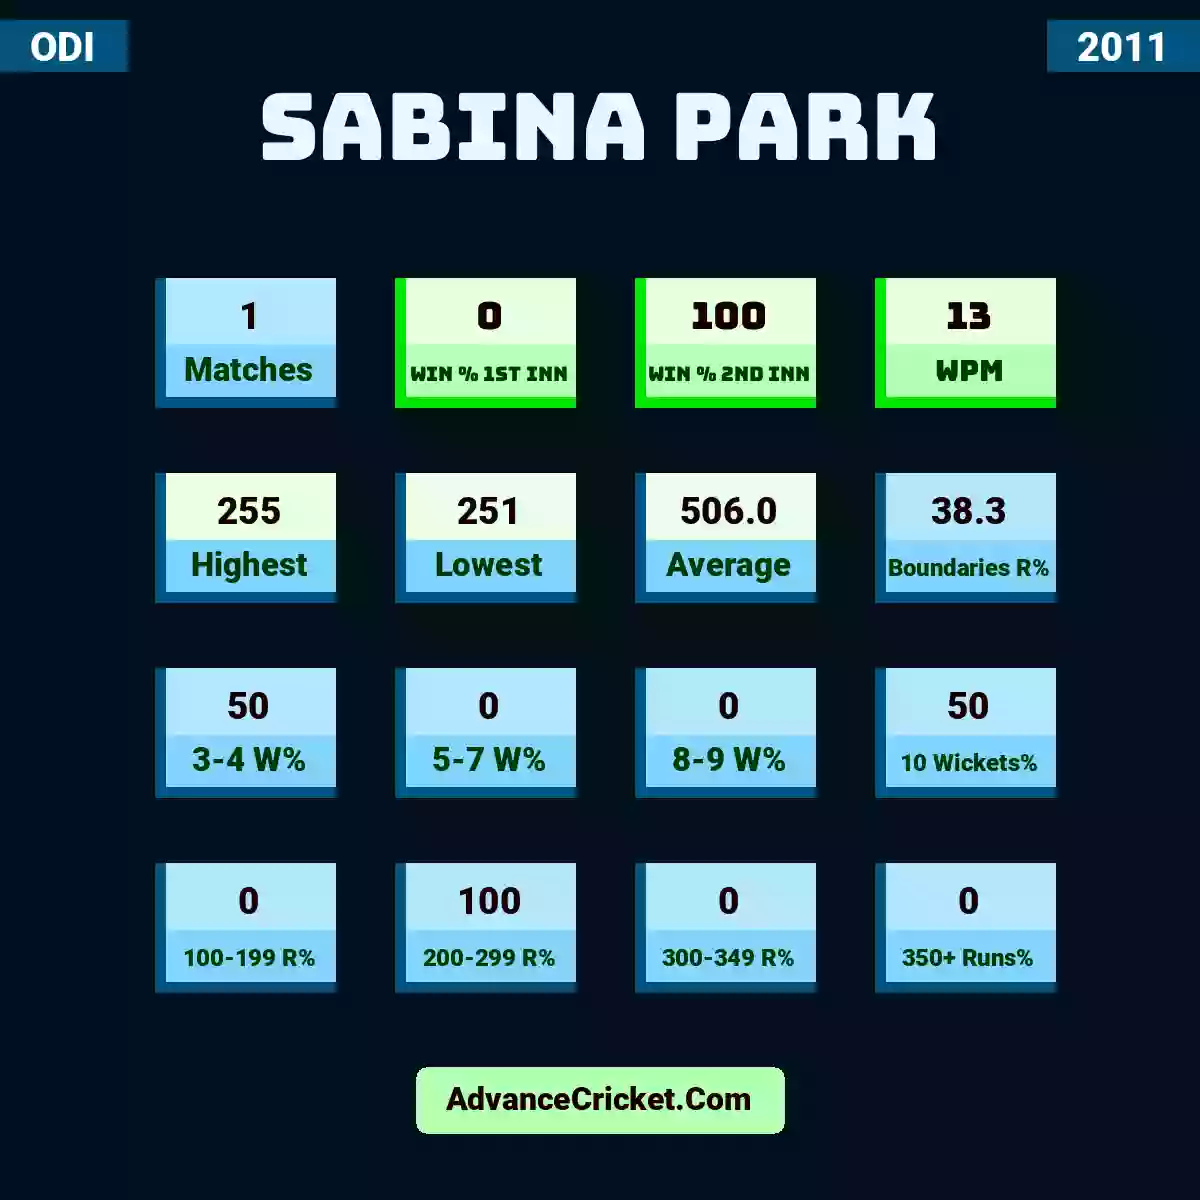 Image showing Sabina Park with Matches: 1, Win % 1st Inn: 0, Win % 2nd Inn: 100, WPM: 13, Highest: 255, Lowest: 251, Average: 506.0, Boundaries R%: 38.3, 3-4 W%: 50, 5-7 W%: 0, 8-9 W%: 0, 10 Wickets%: 50, 100-199 R%: 0, 200-299 R%: 100, 300-349 R%: 0, 350+ Runs%: 0.